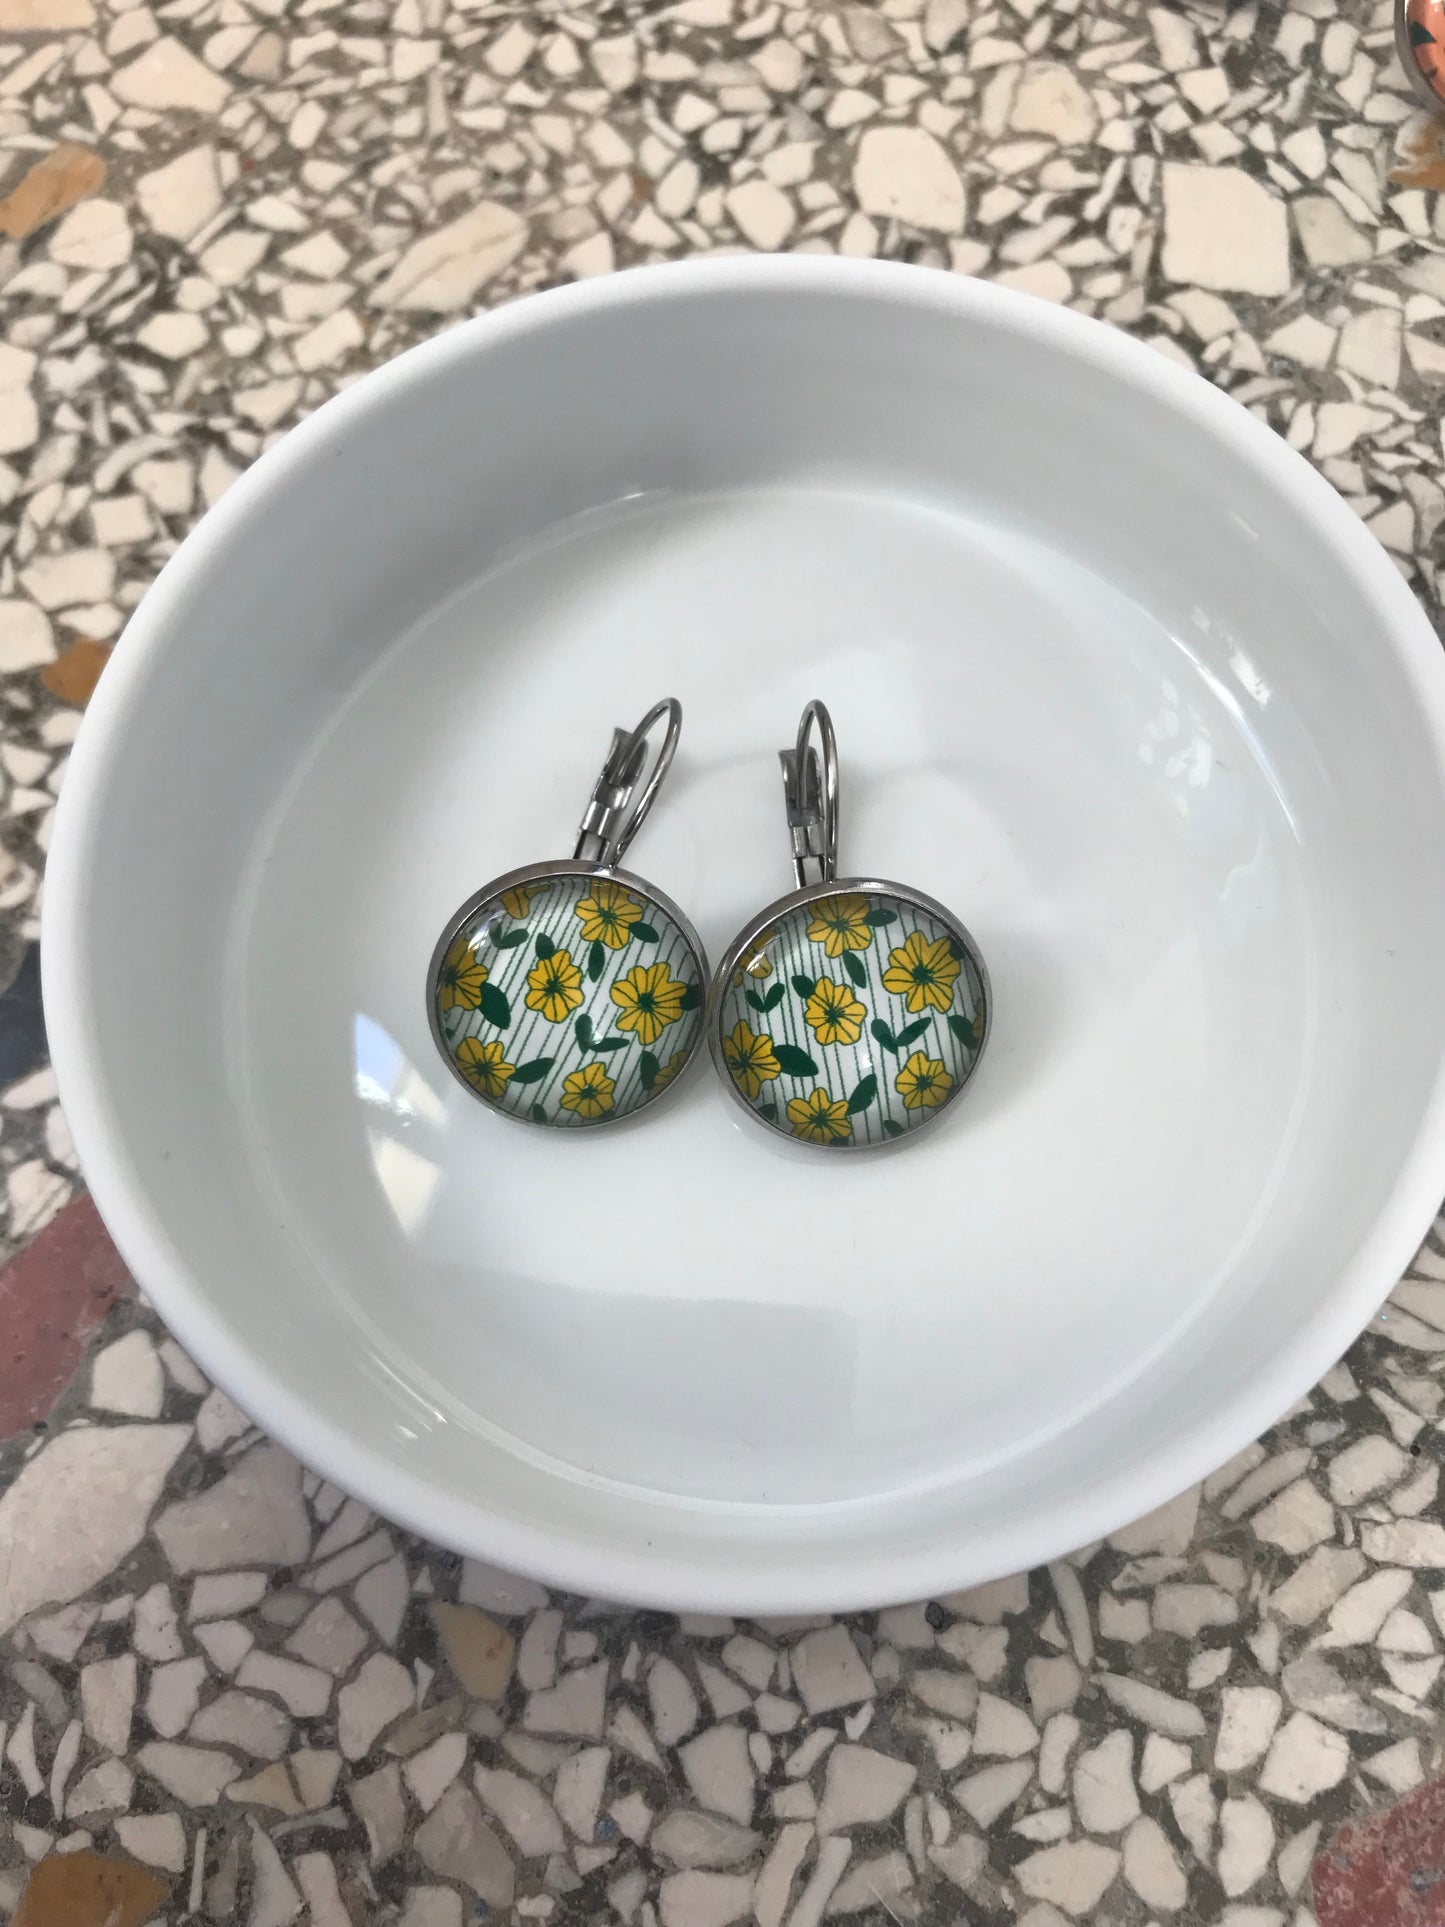 Yellow and White flowers earrings 